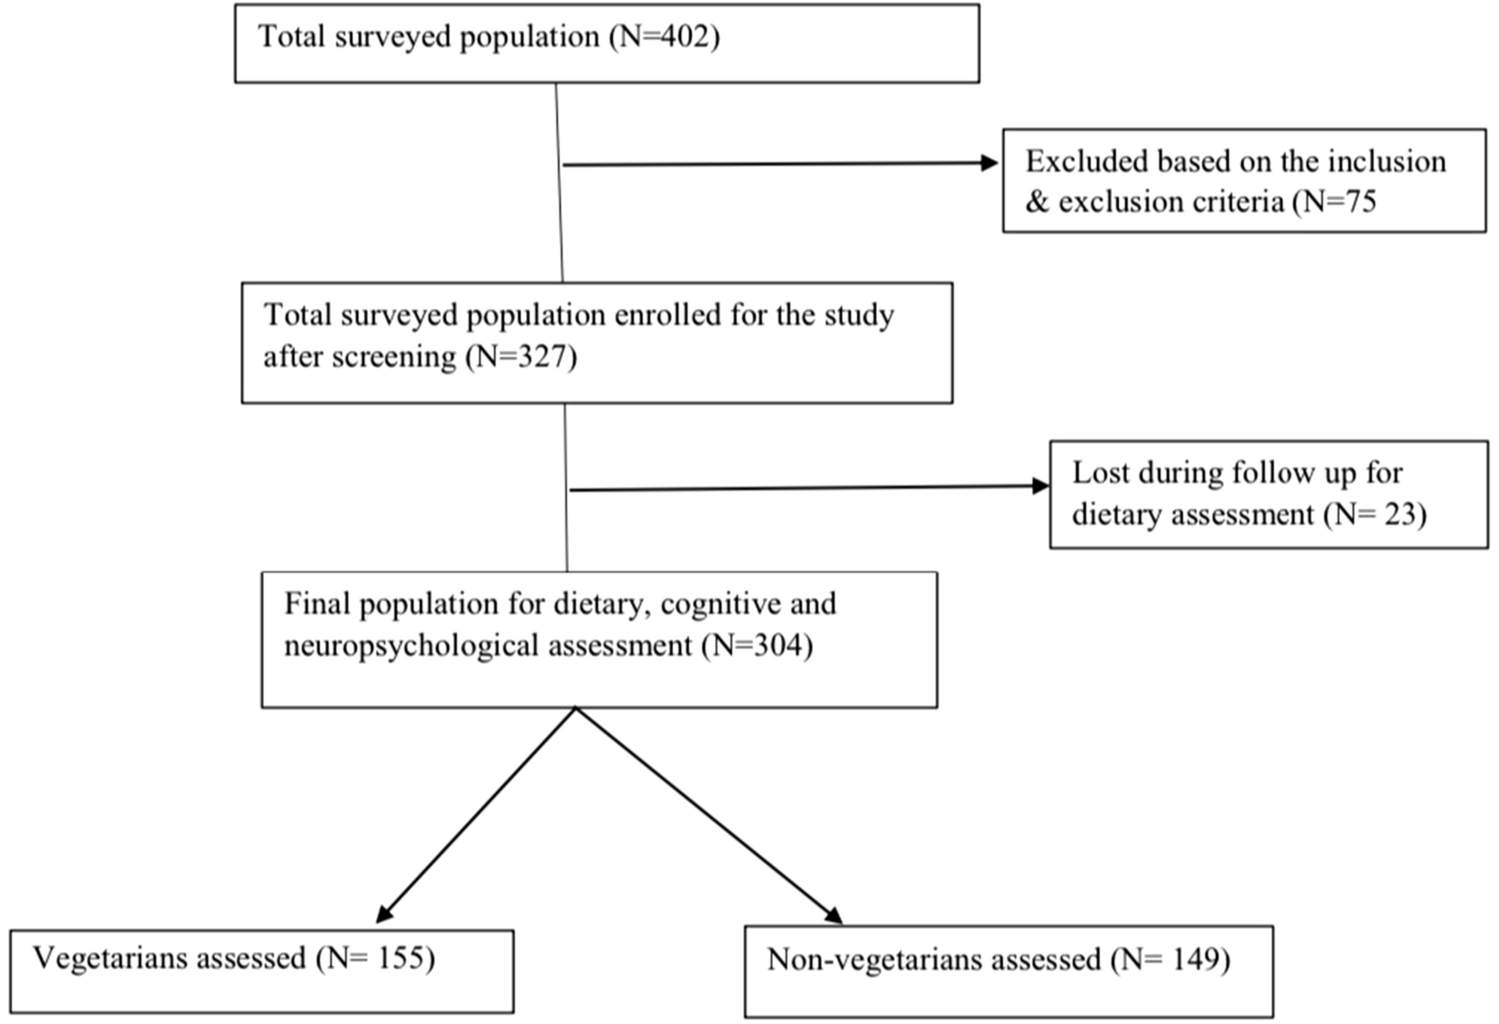 Impact of vegetarianism on cognition and neuropsychological status among urban community-dwelling adults in Telangana, South India: a cross-sectional study